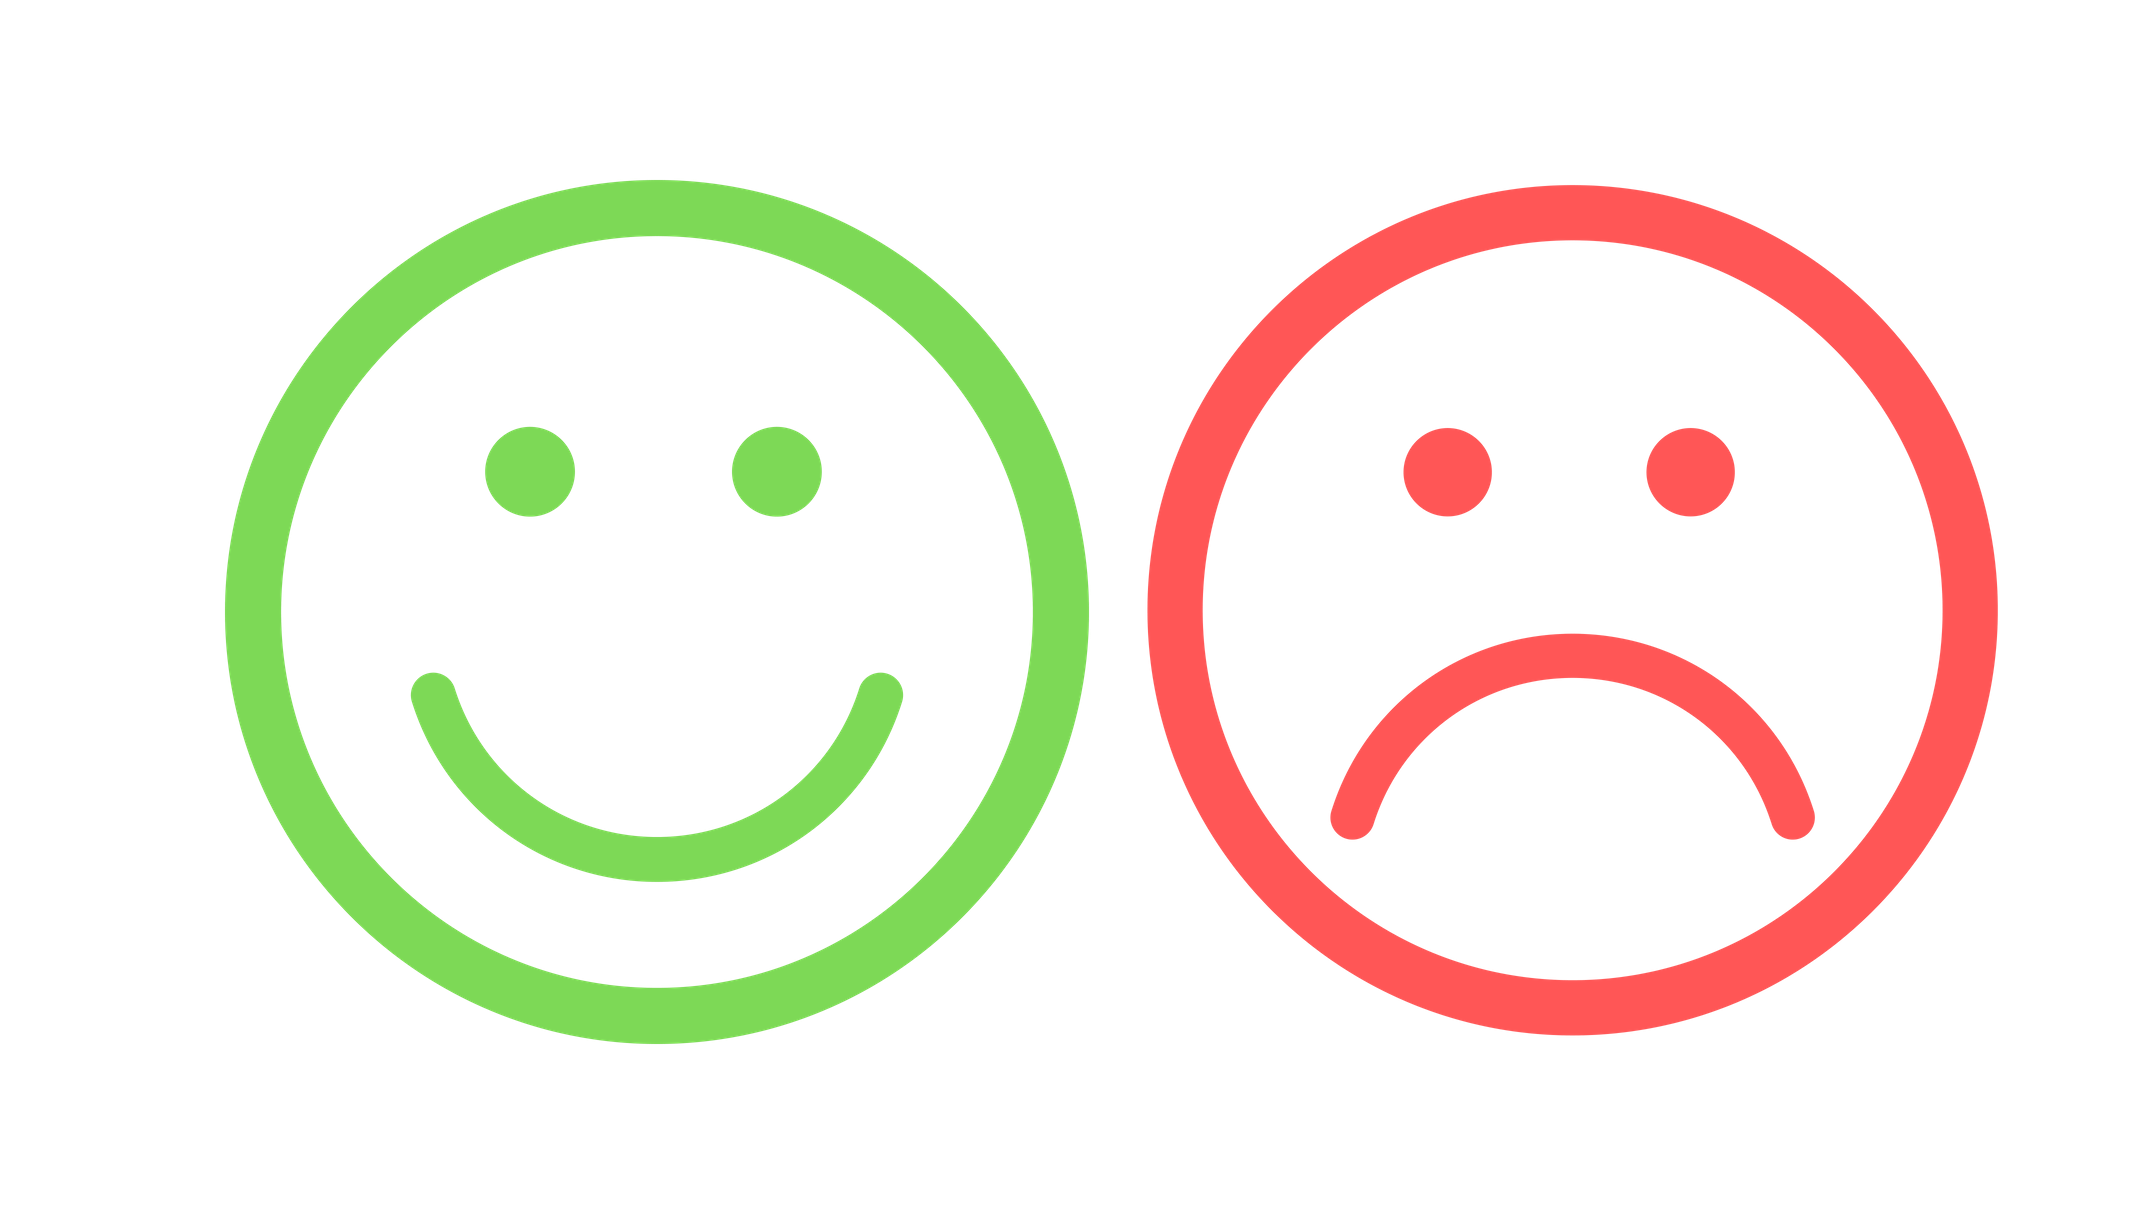 Feedback PNG Image in Transparent